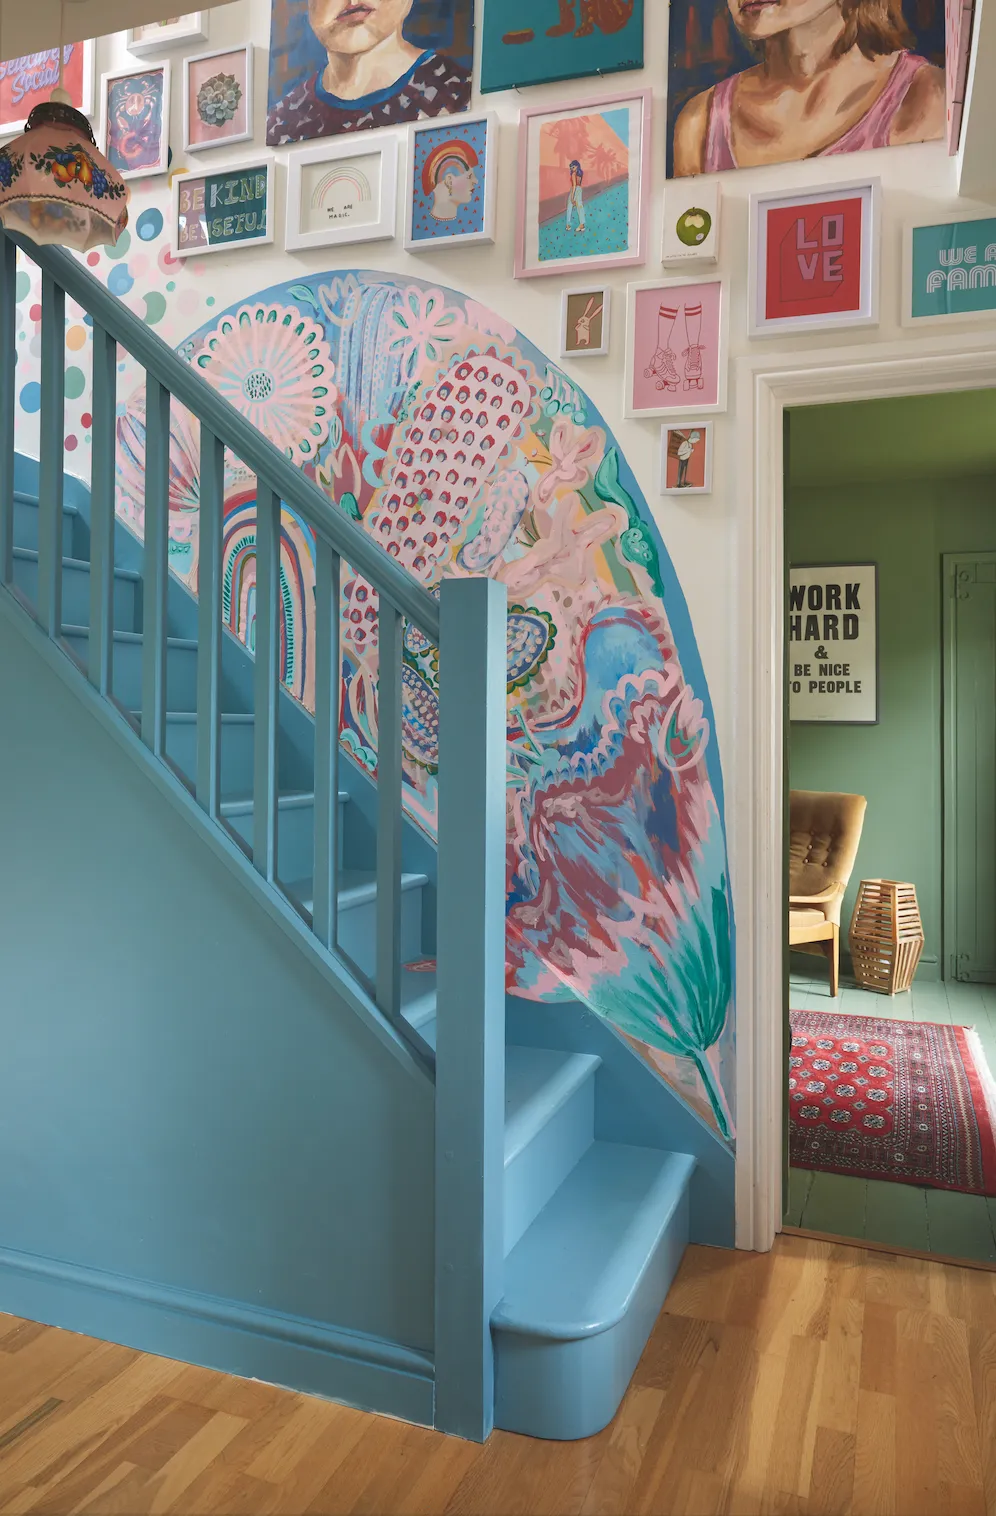 The hallway’s unique mural and staircase, painted in Farrow & Ball’s Stone Blue, reflects the arty vibe of the rest of Jess’s home